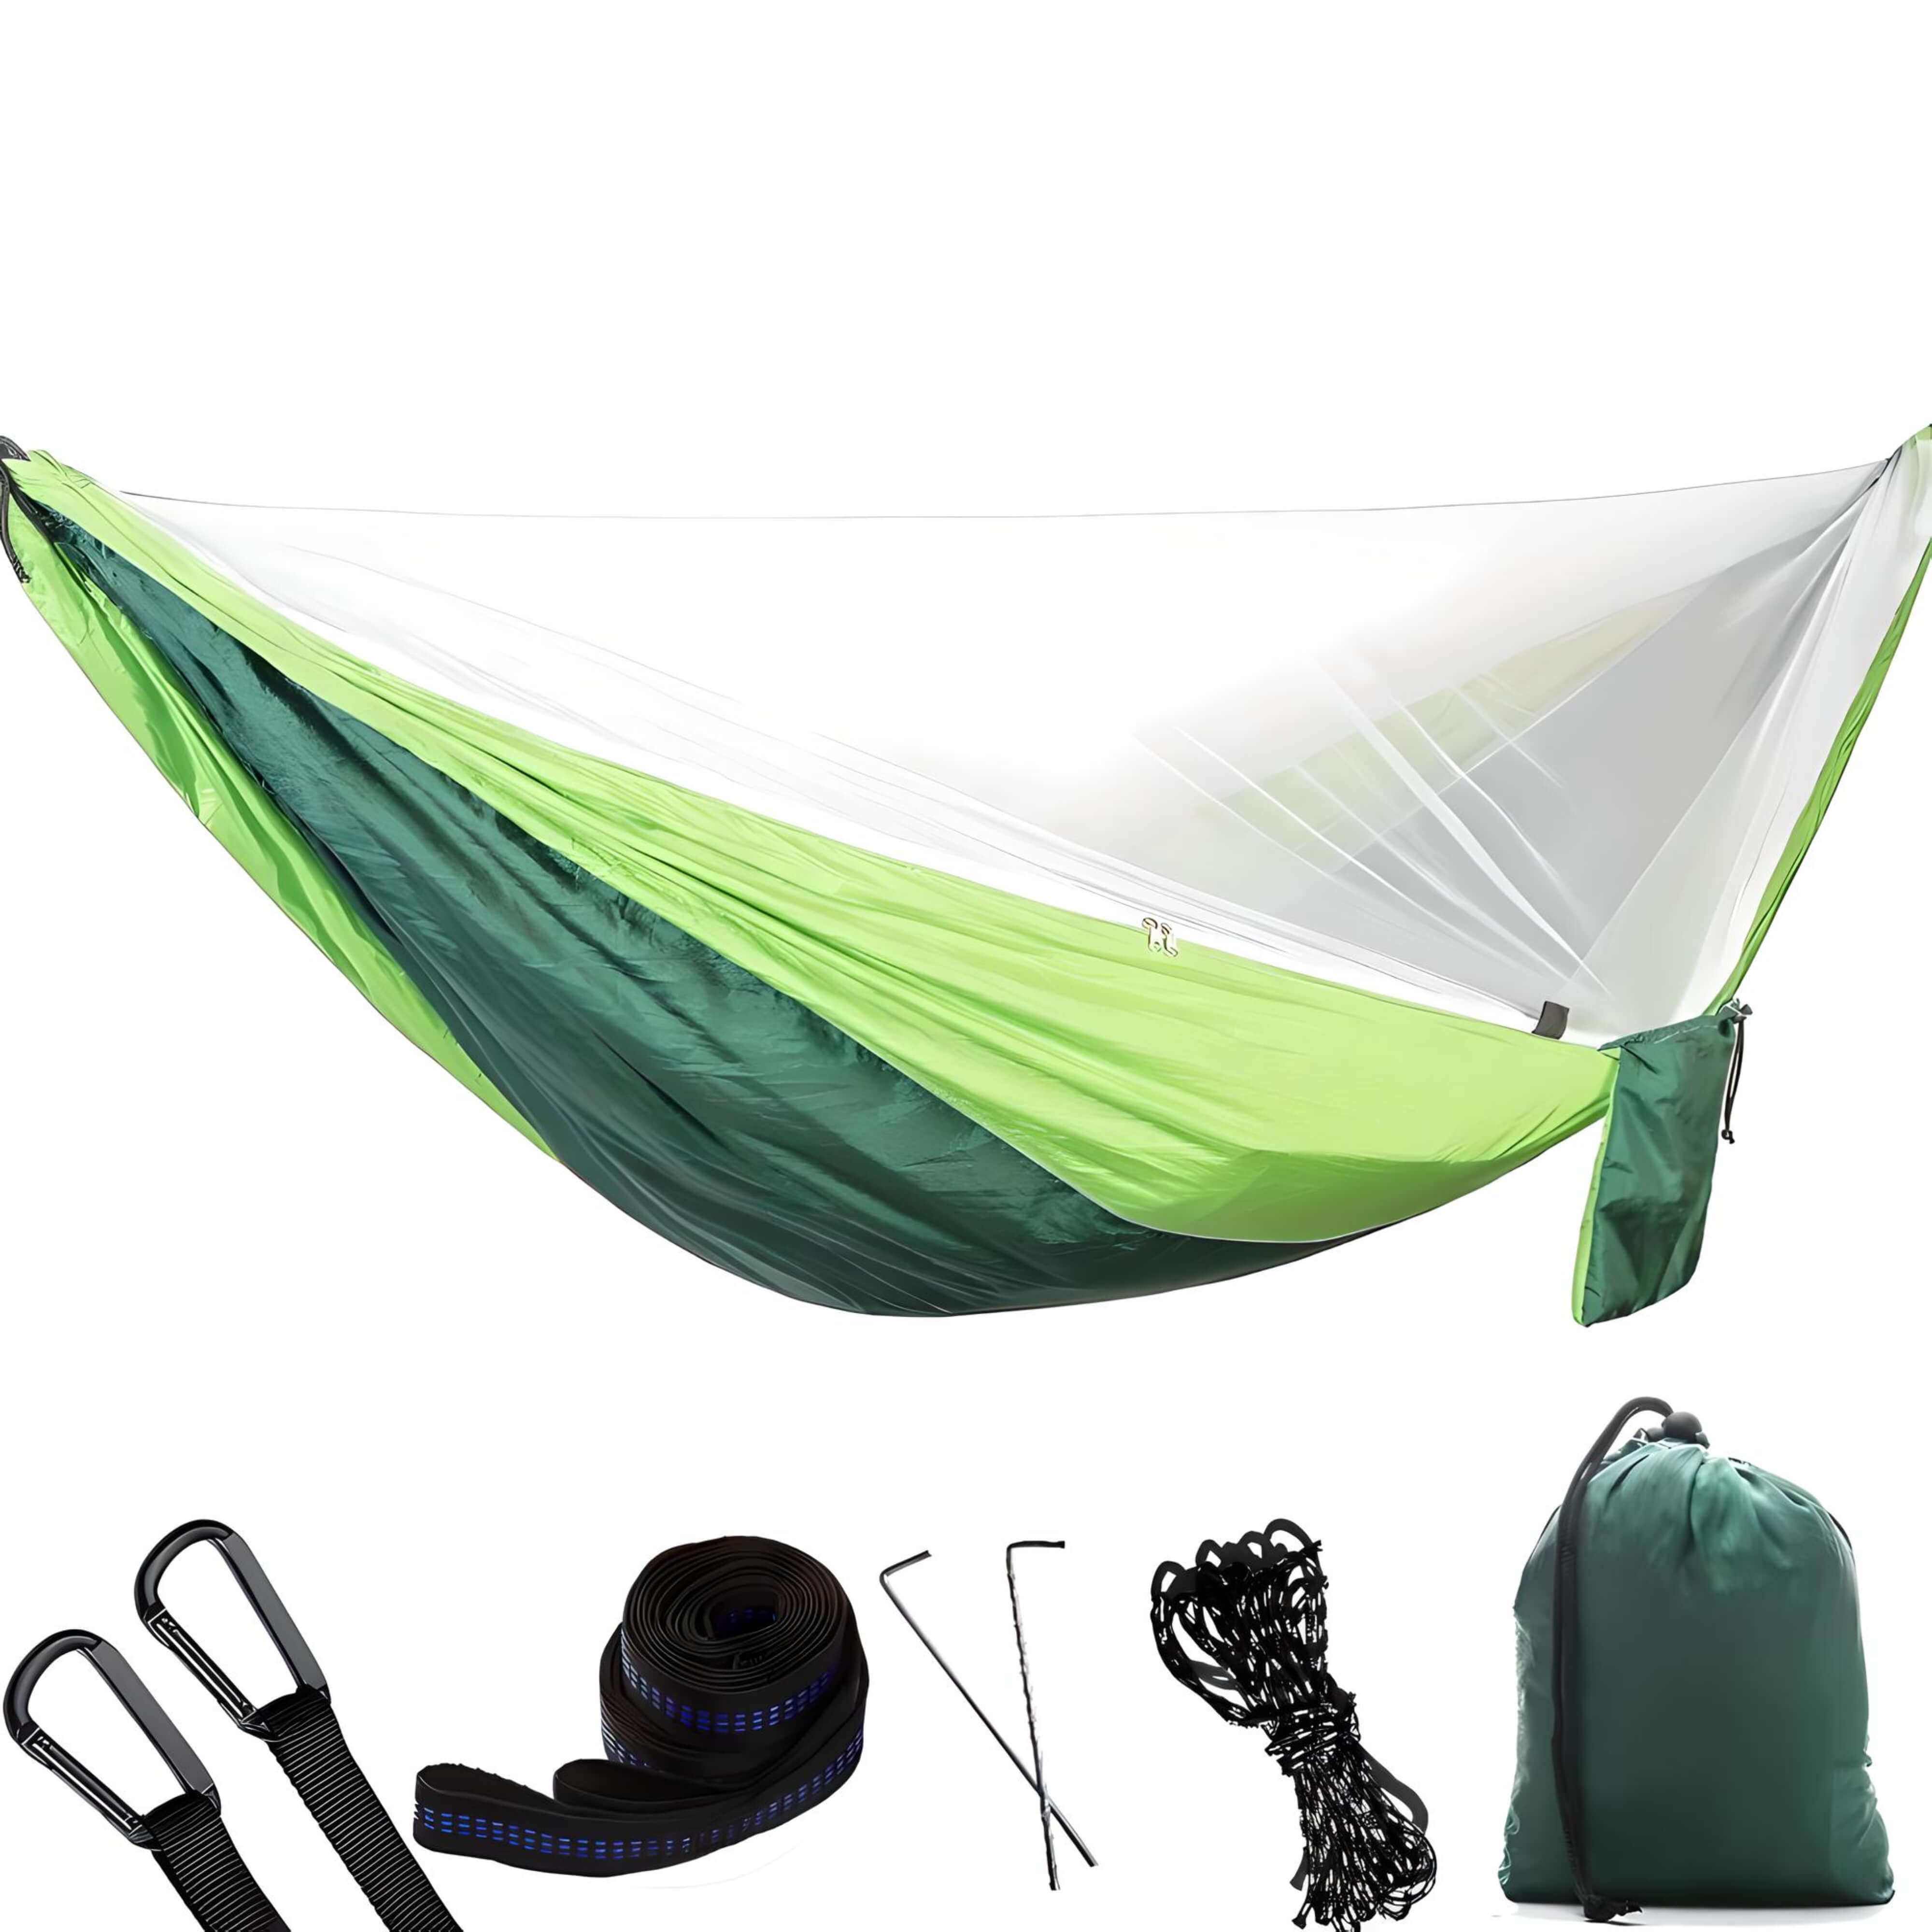 Hammock with Net - Bug-Free Outdoor Relaxation